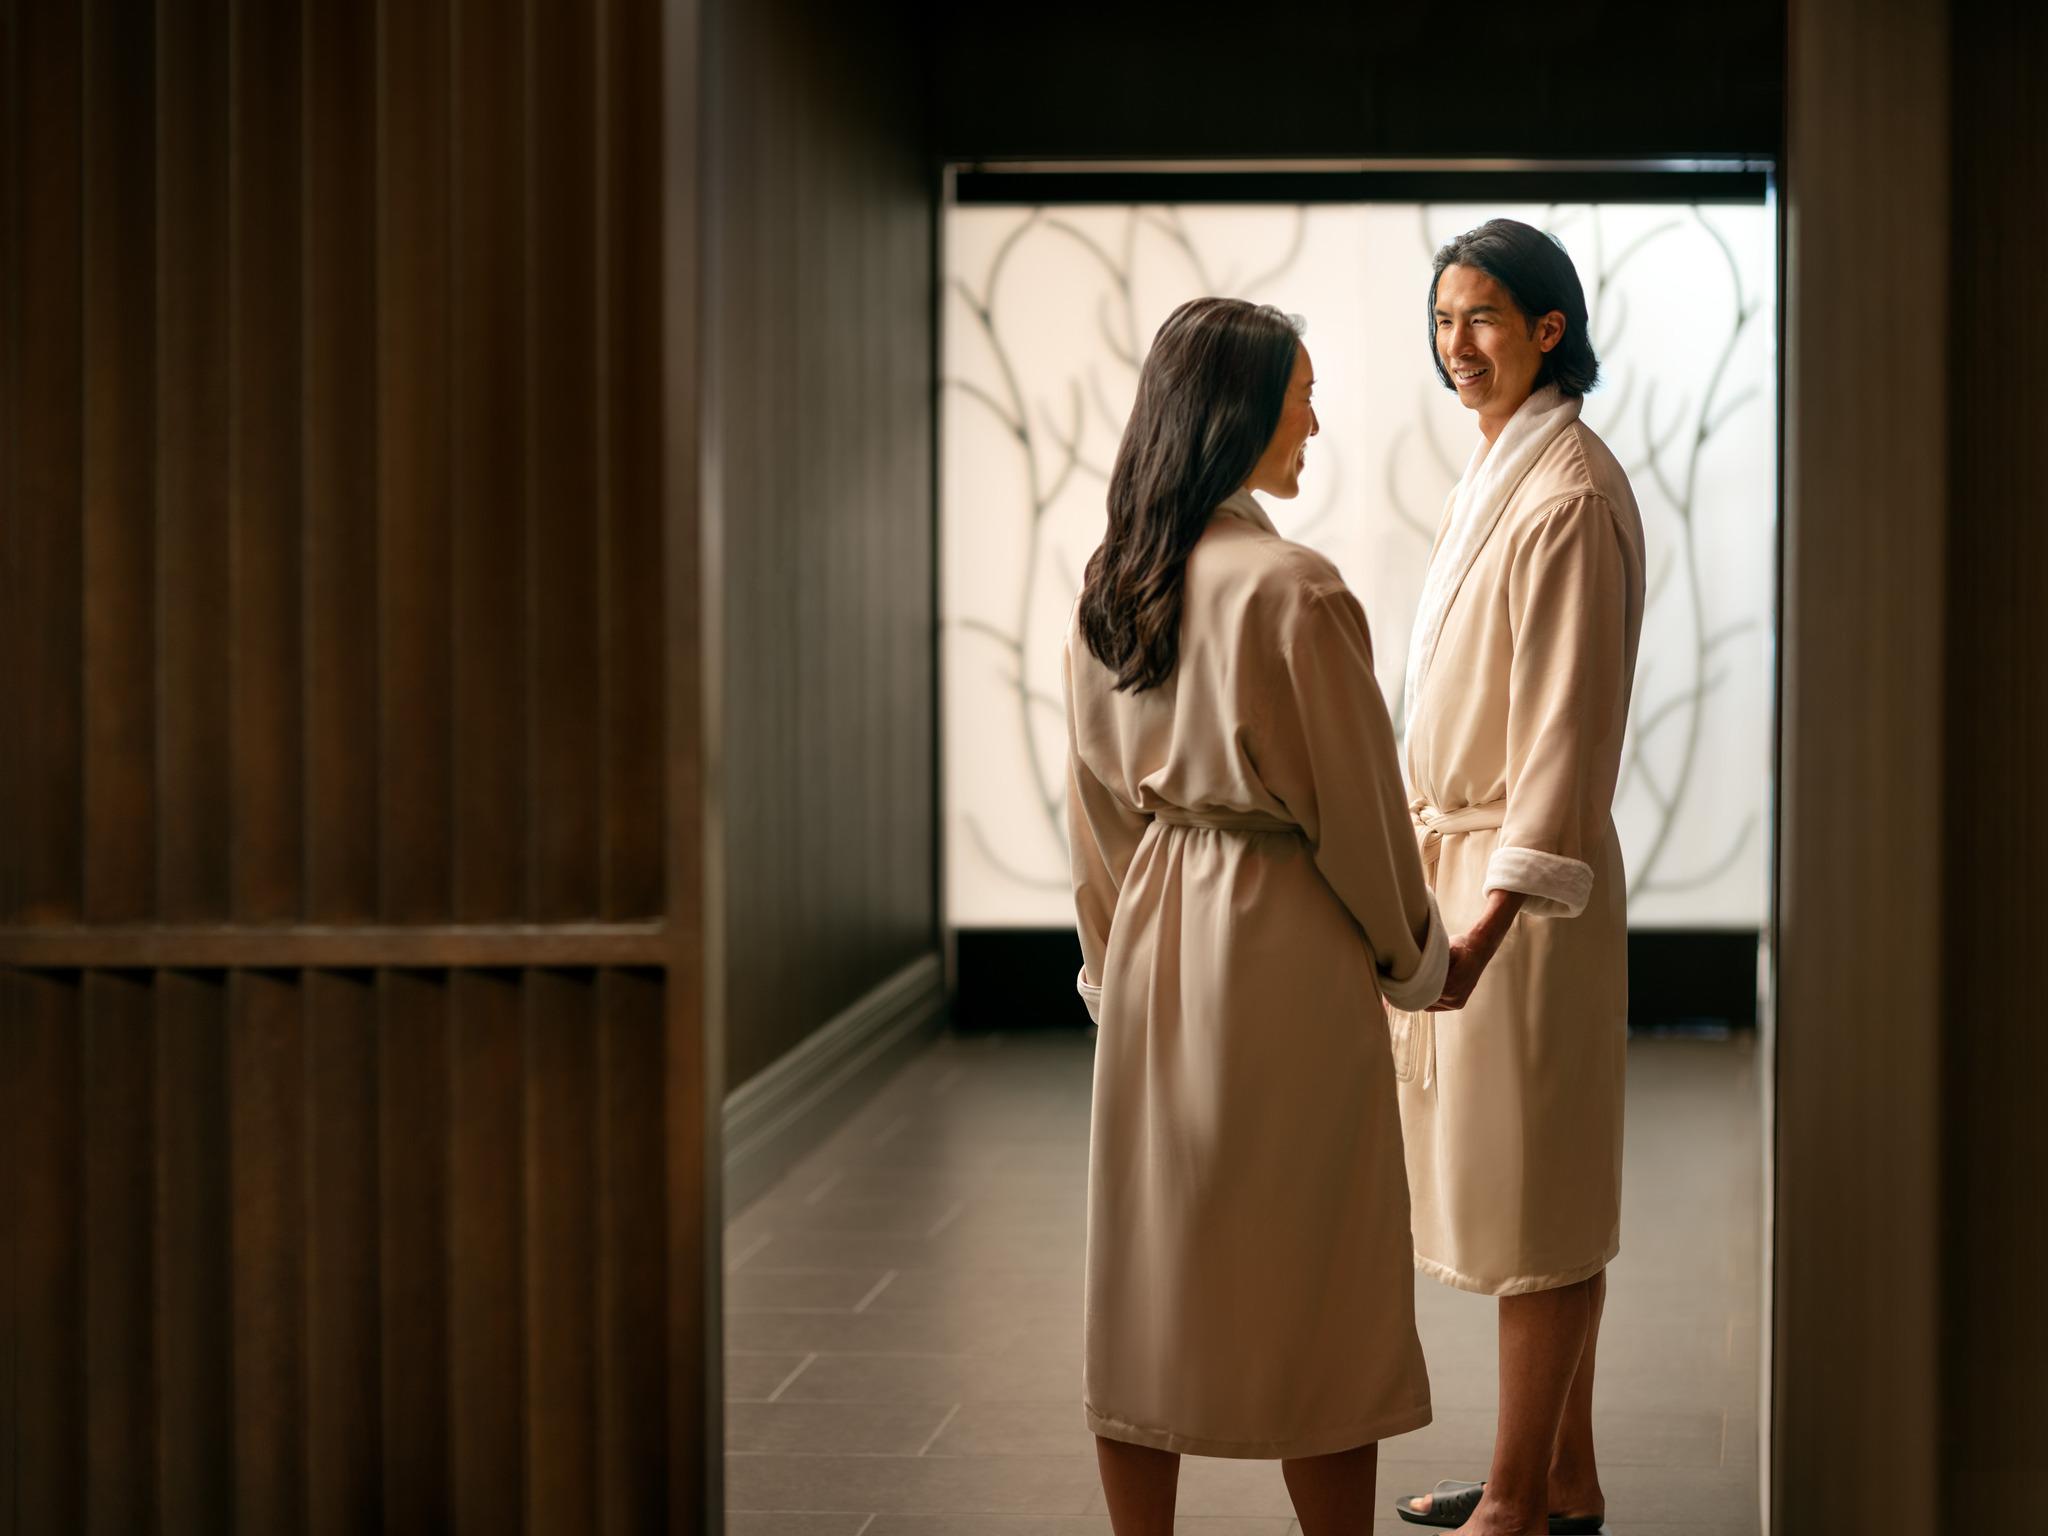 Luxury spa, SpaWell, located inside Napa Valley Marriott Hotel & Spa, Napa, CA. Our day spa features facials, massages, body wraps & waxing. Reflecting the essence of the Marriott, all treatments become a unique beauty experience.